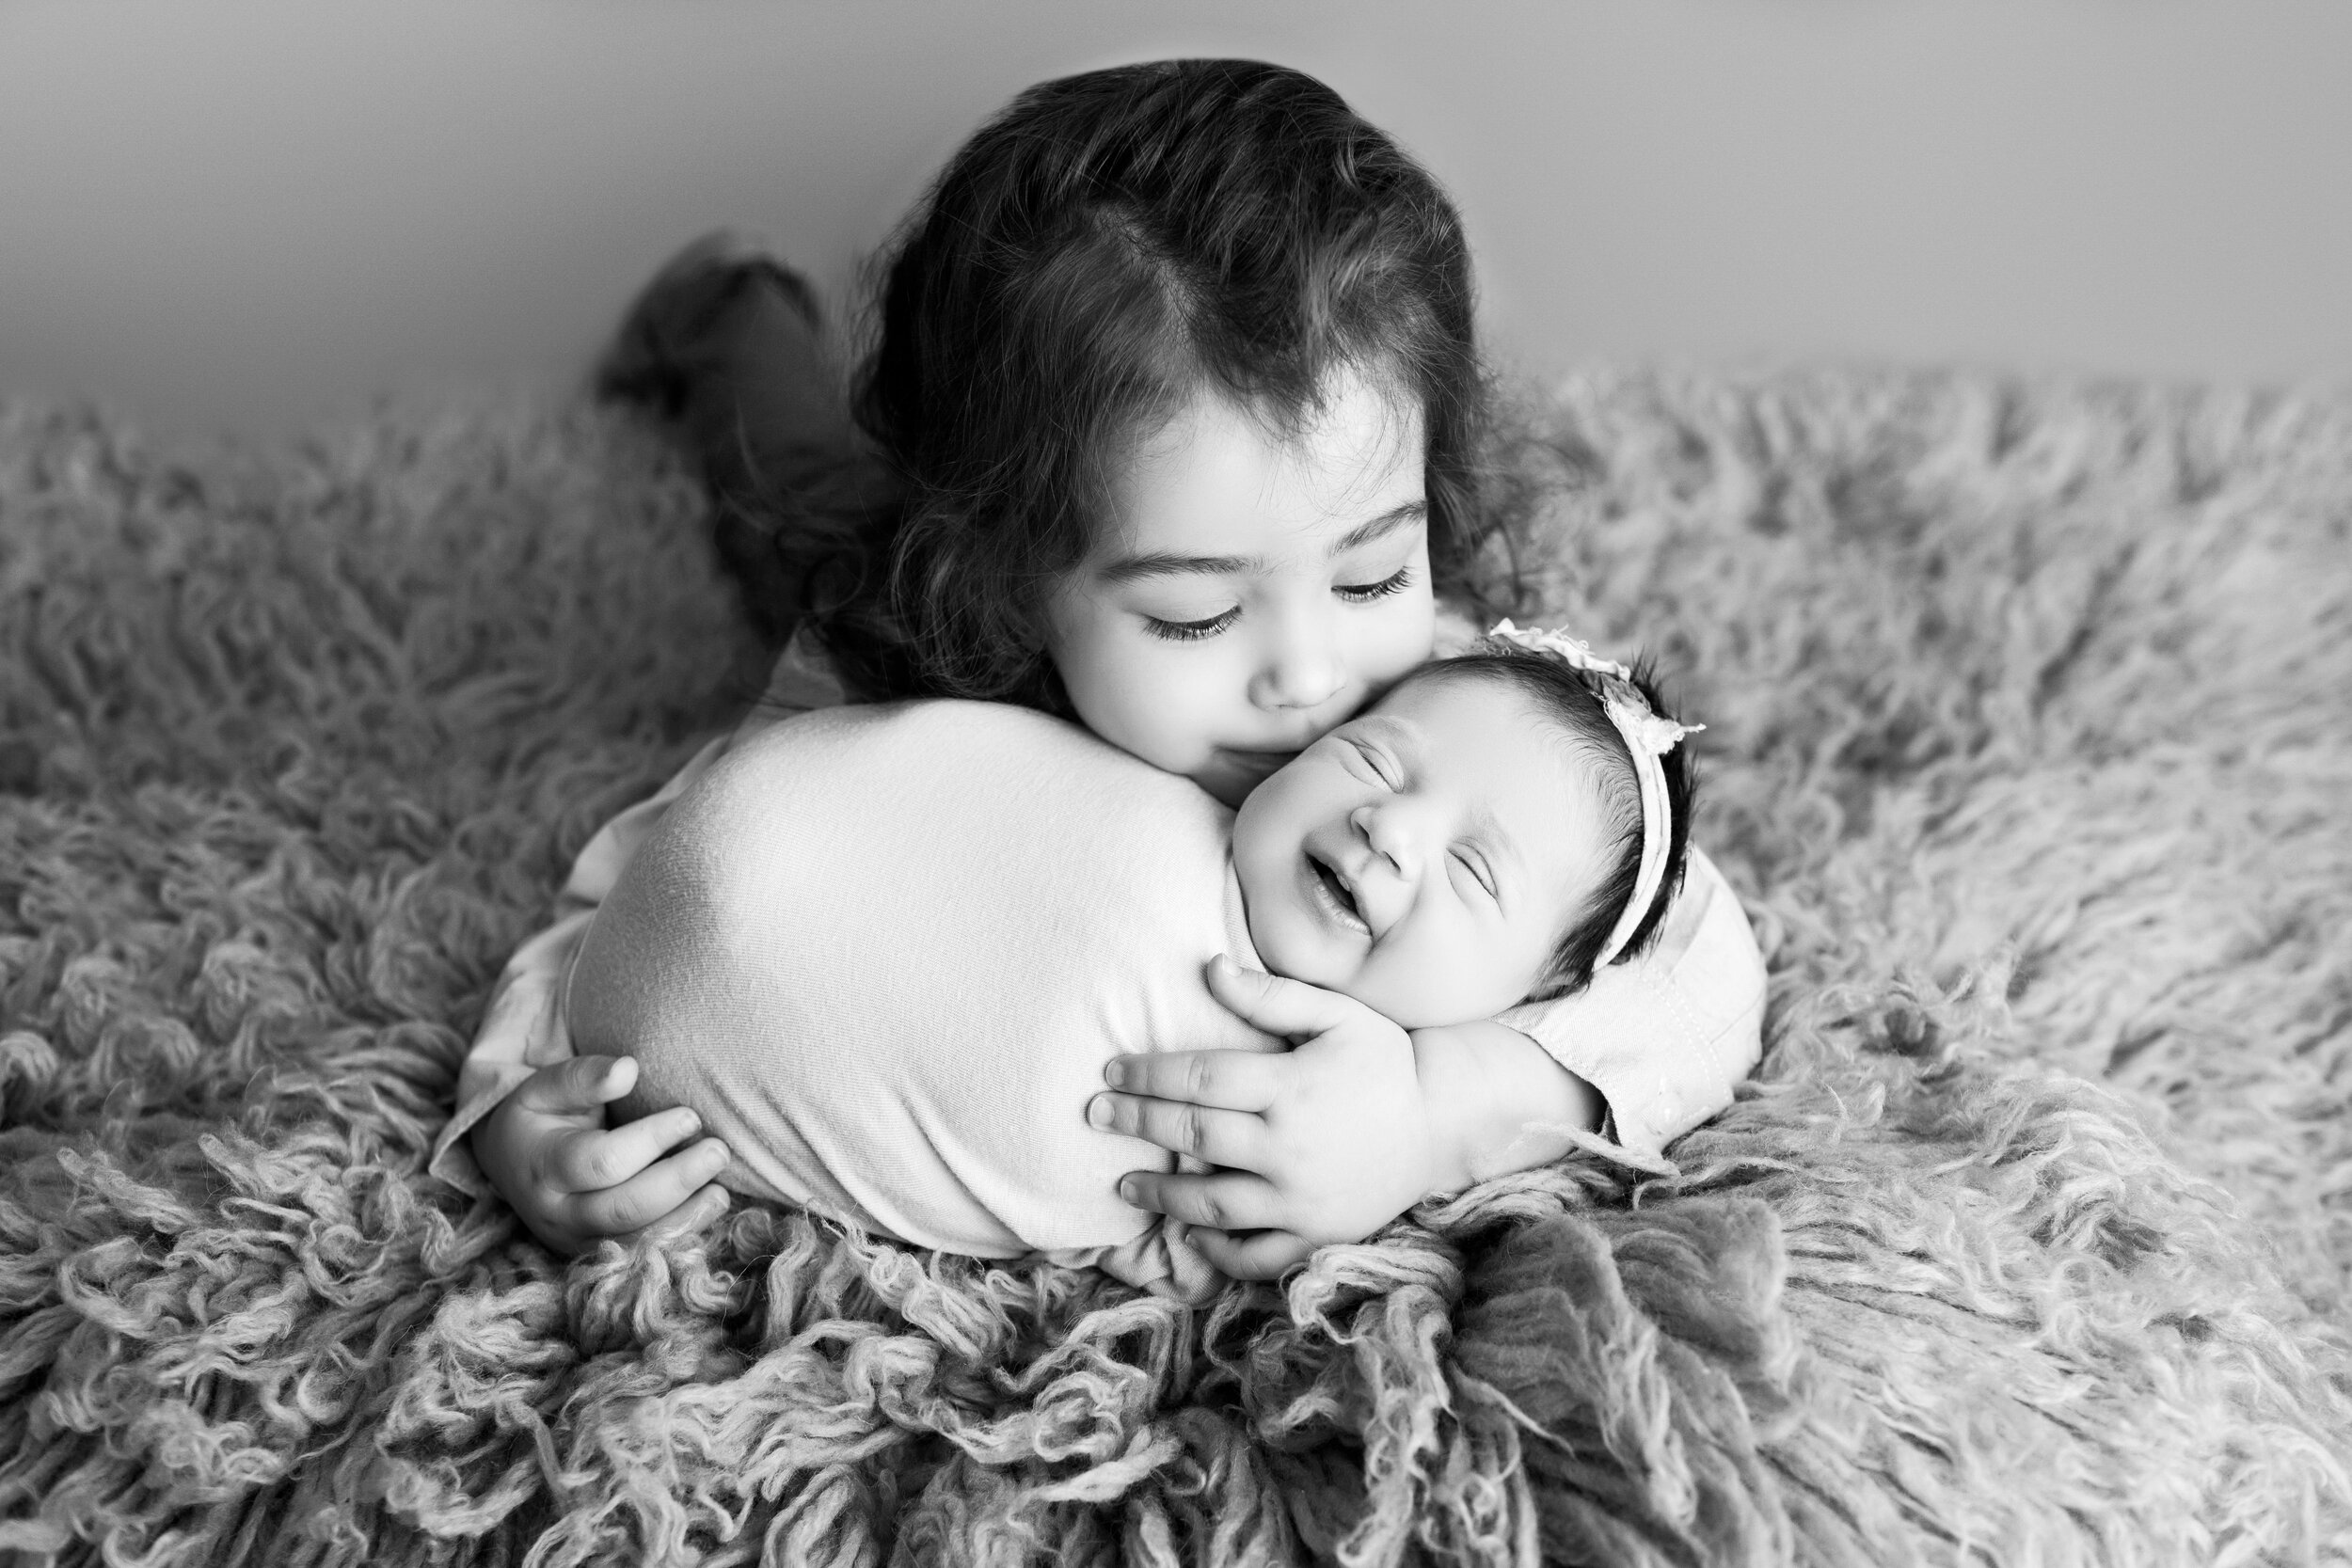 older sibling planting a kiss on his newborn sisters cheek while she smiles